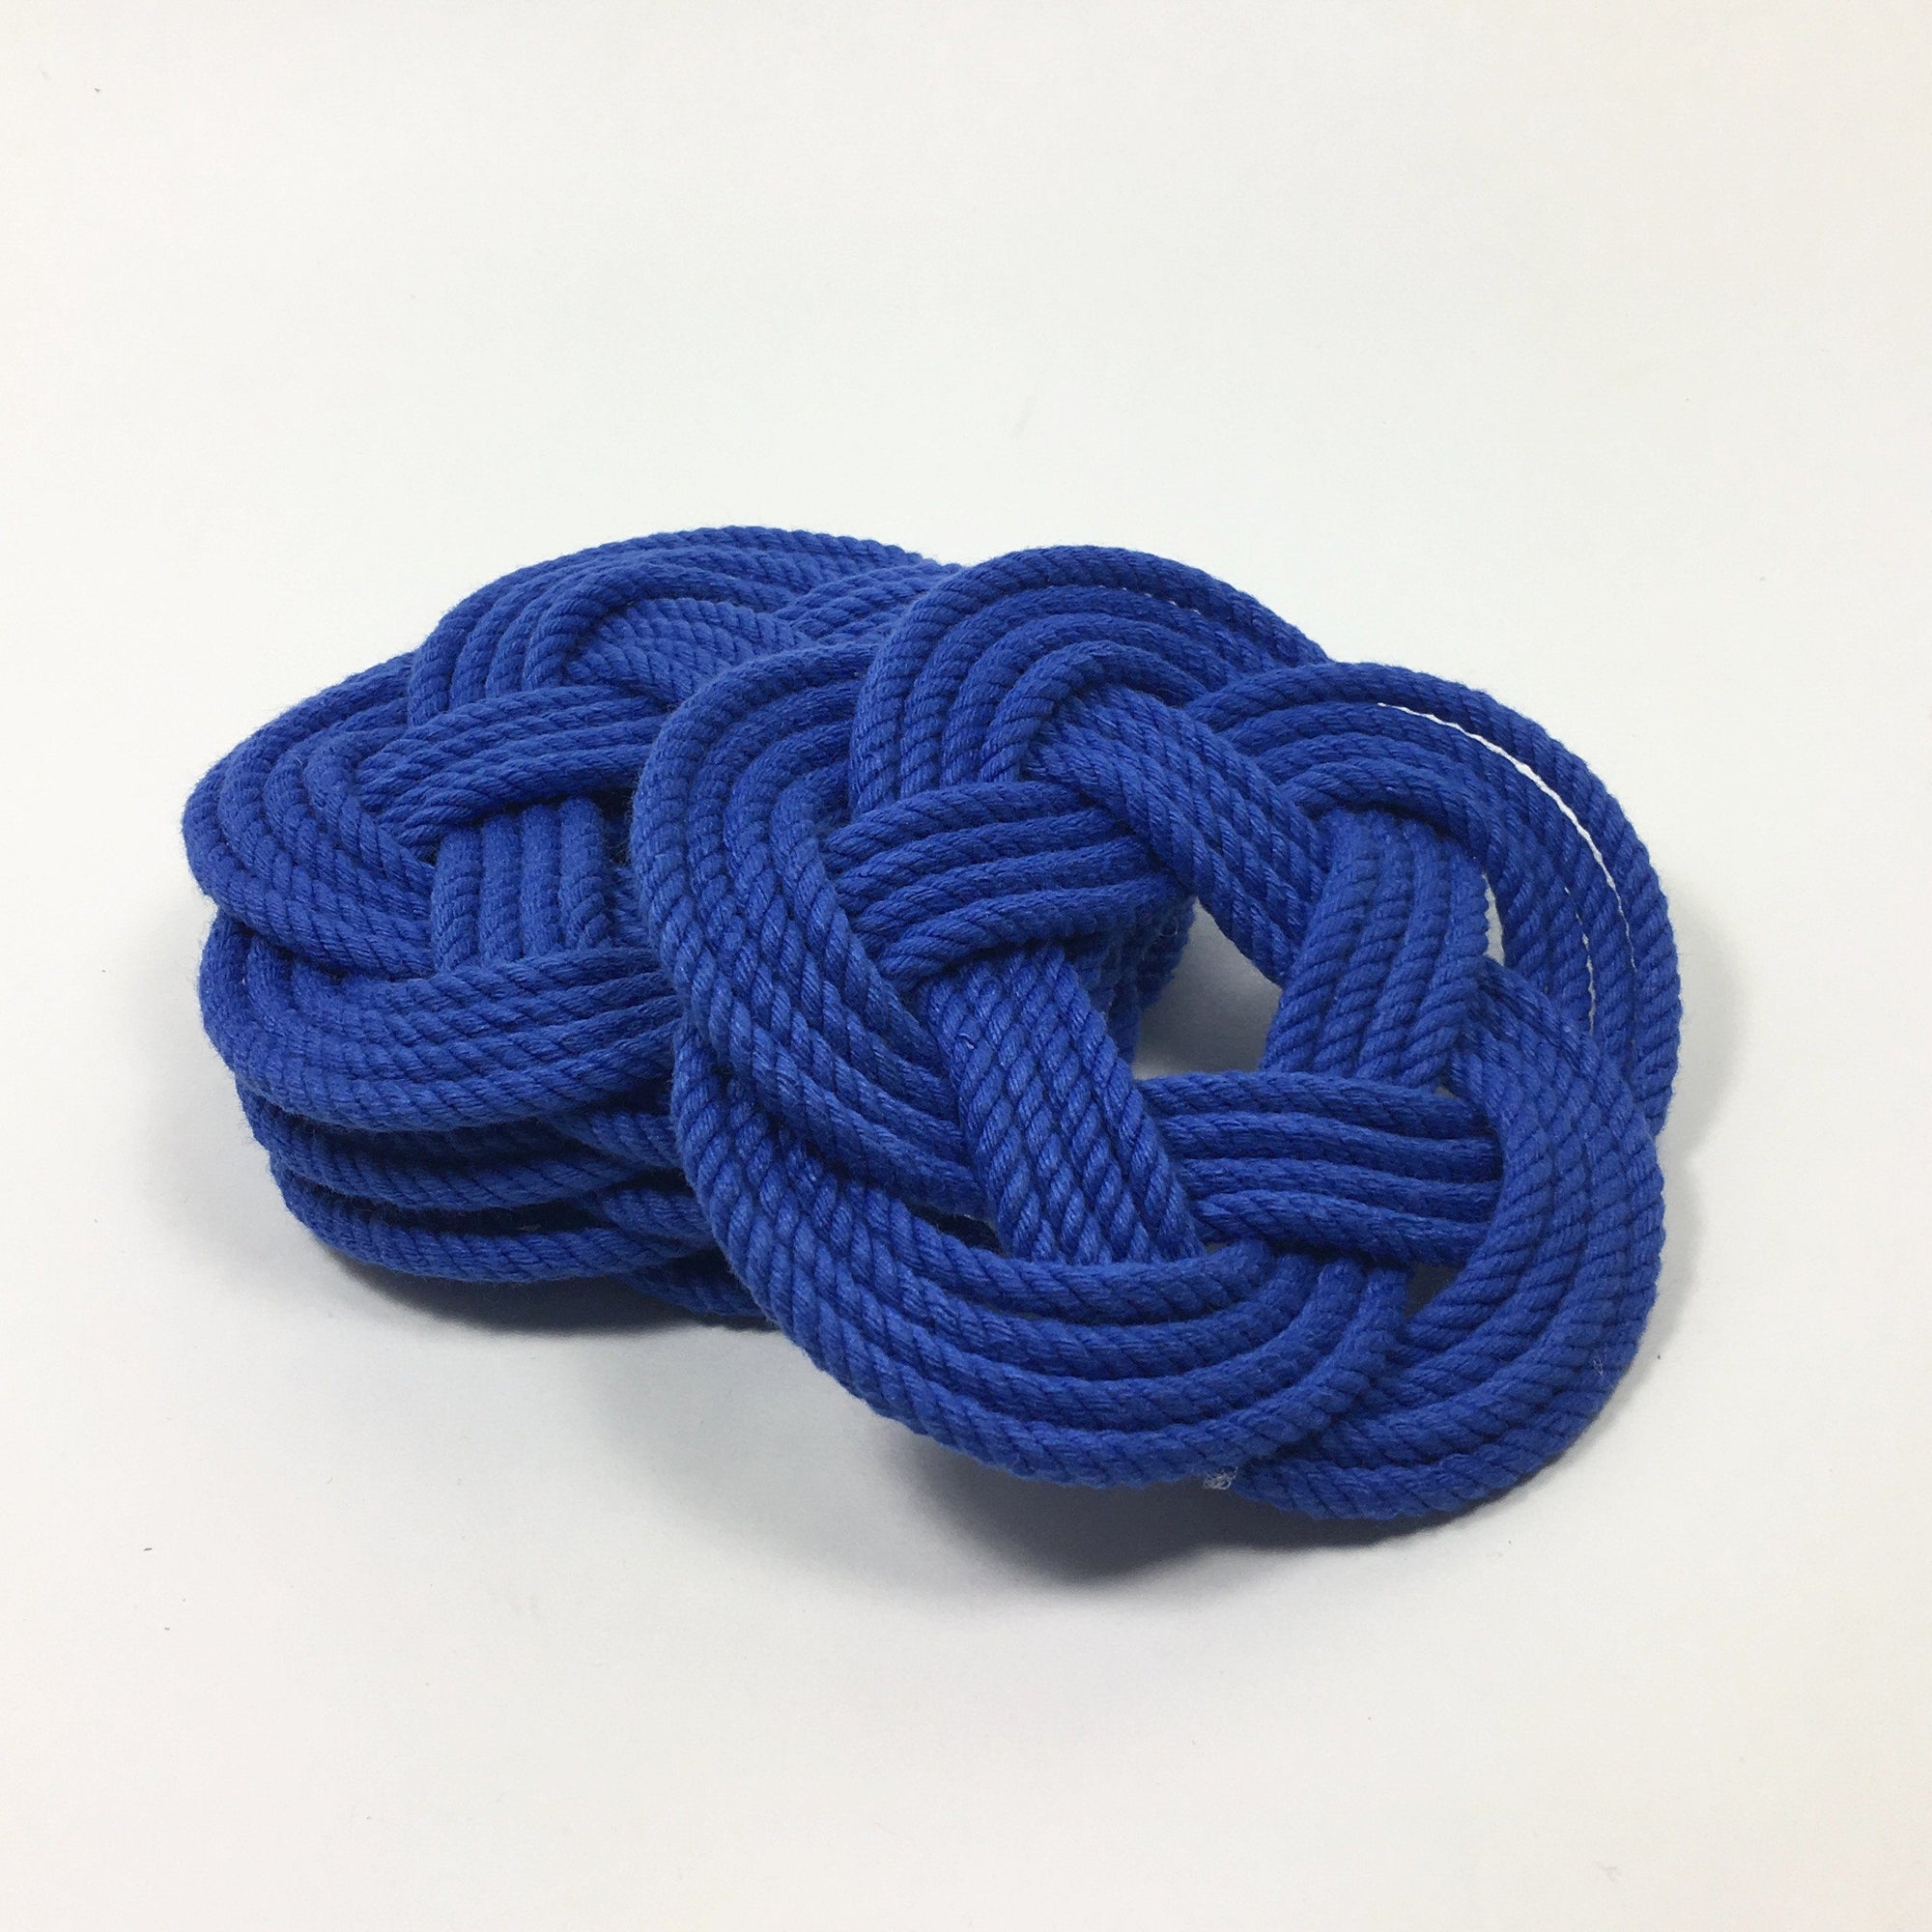 Nautical Knot Sailor Knot Coasters, woven in Royal Blue, Set of 4 handmade at Mystic Knotwork